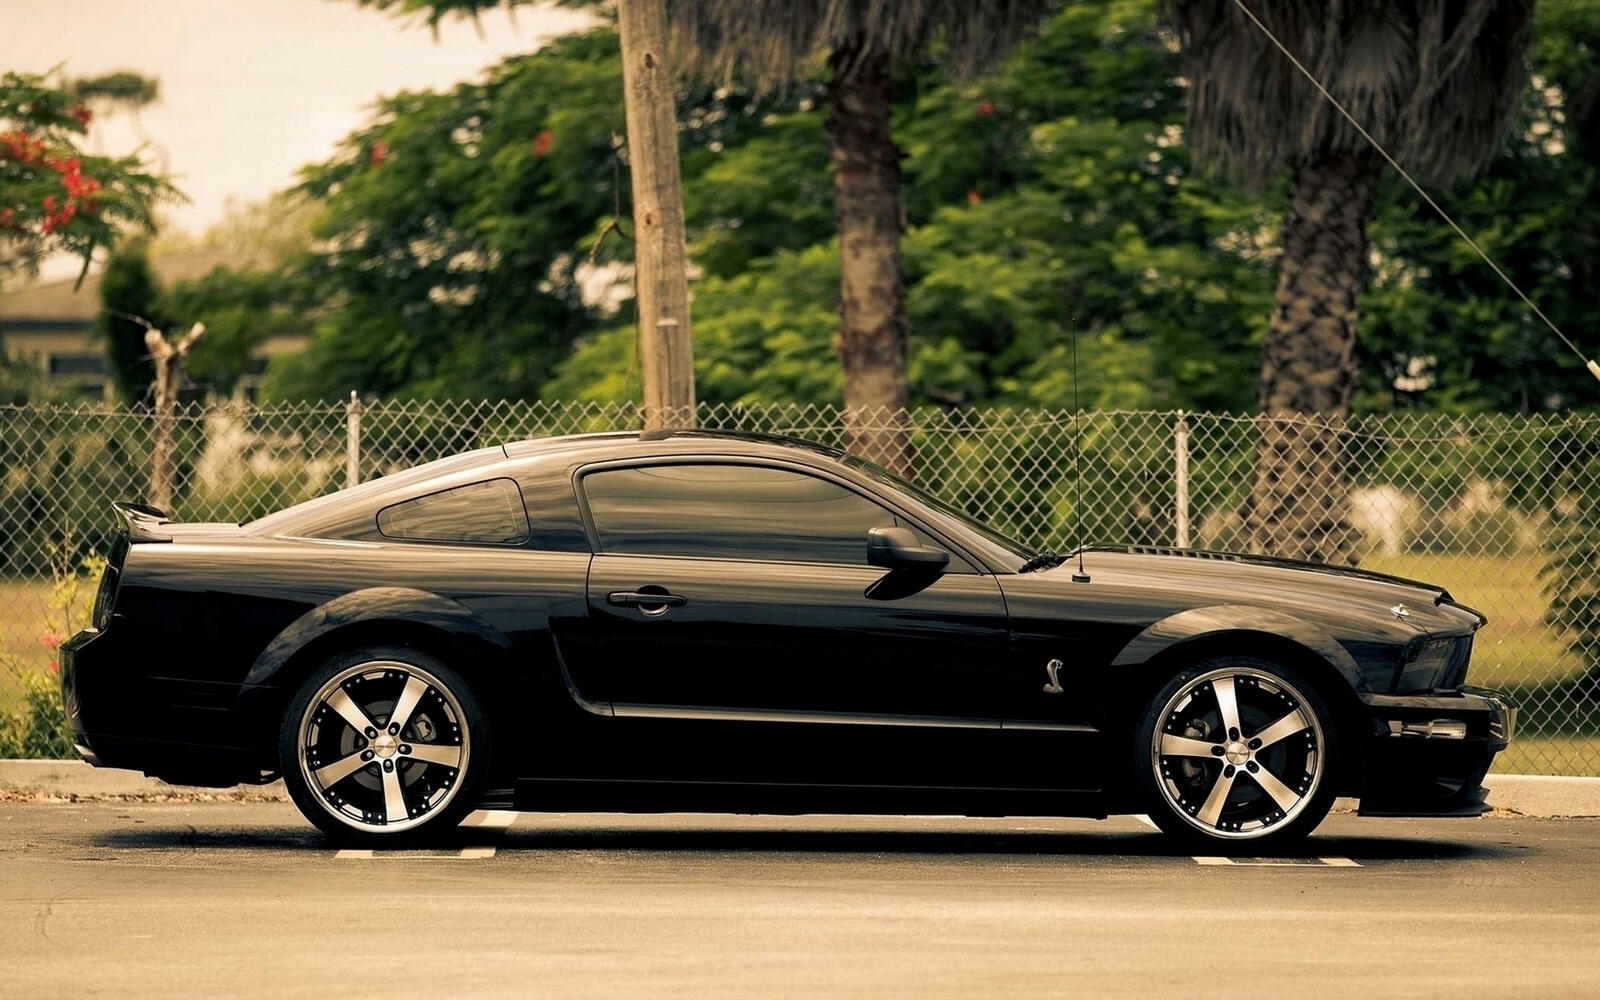 Wallpapers Ford Mustang Black on the desktop